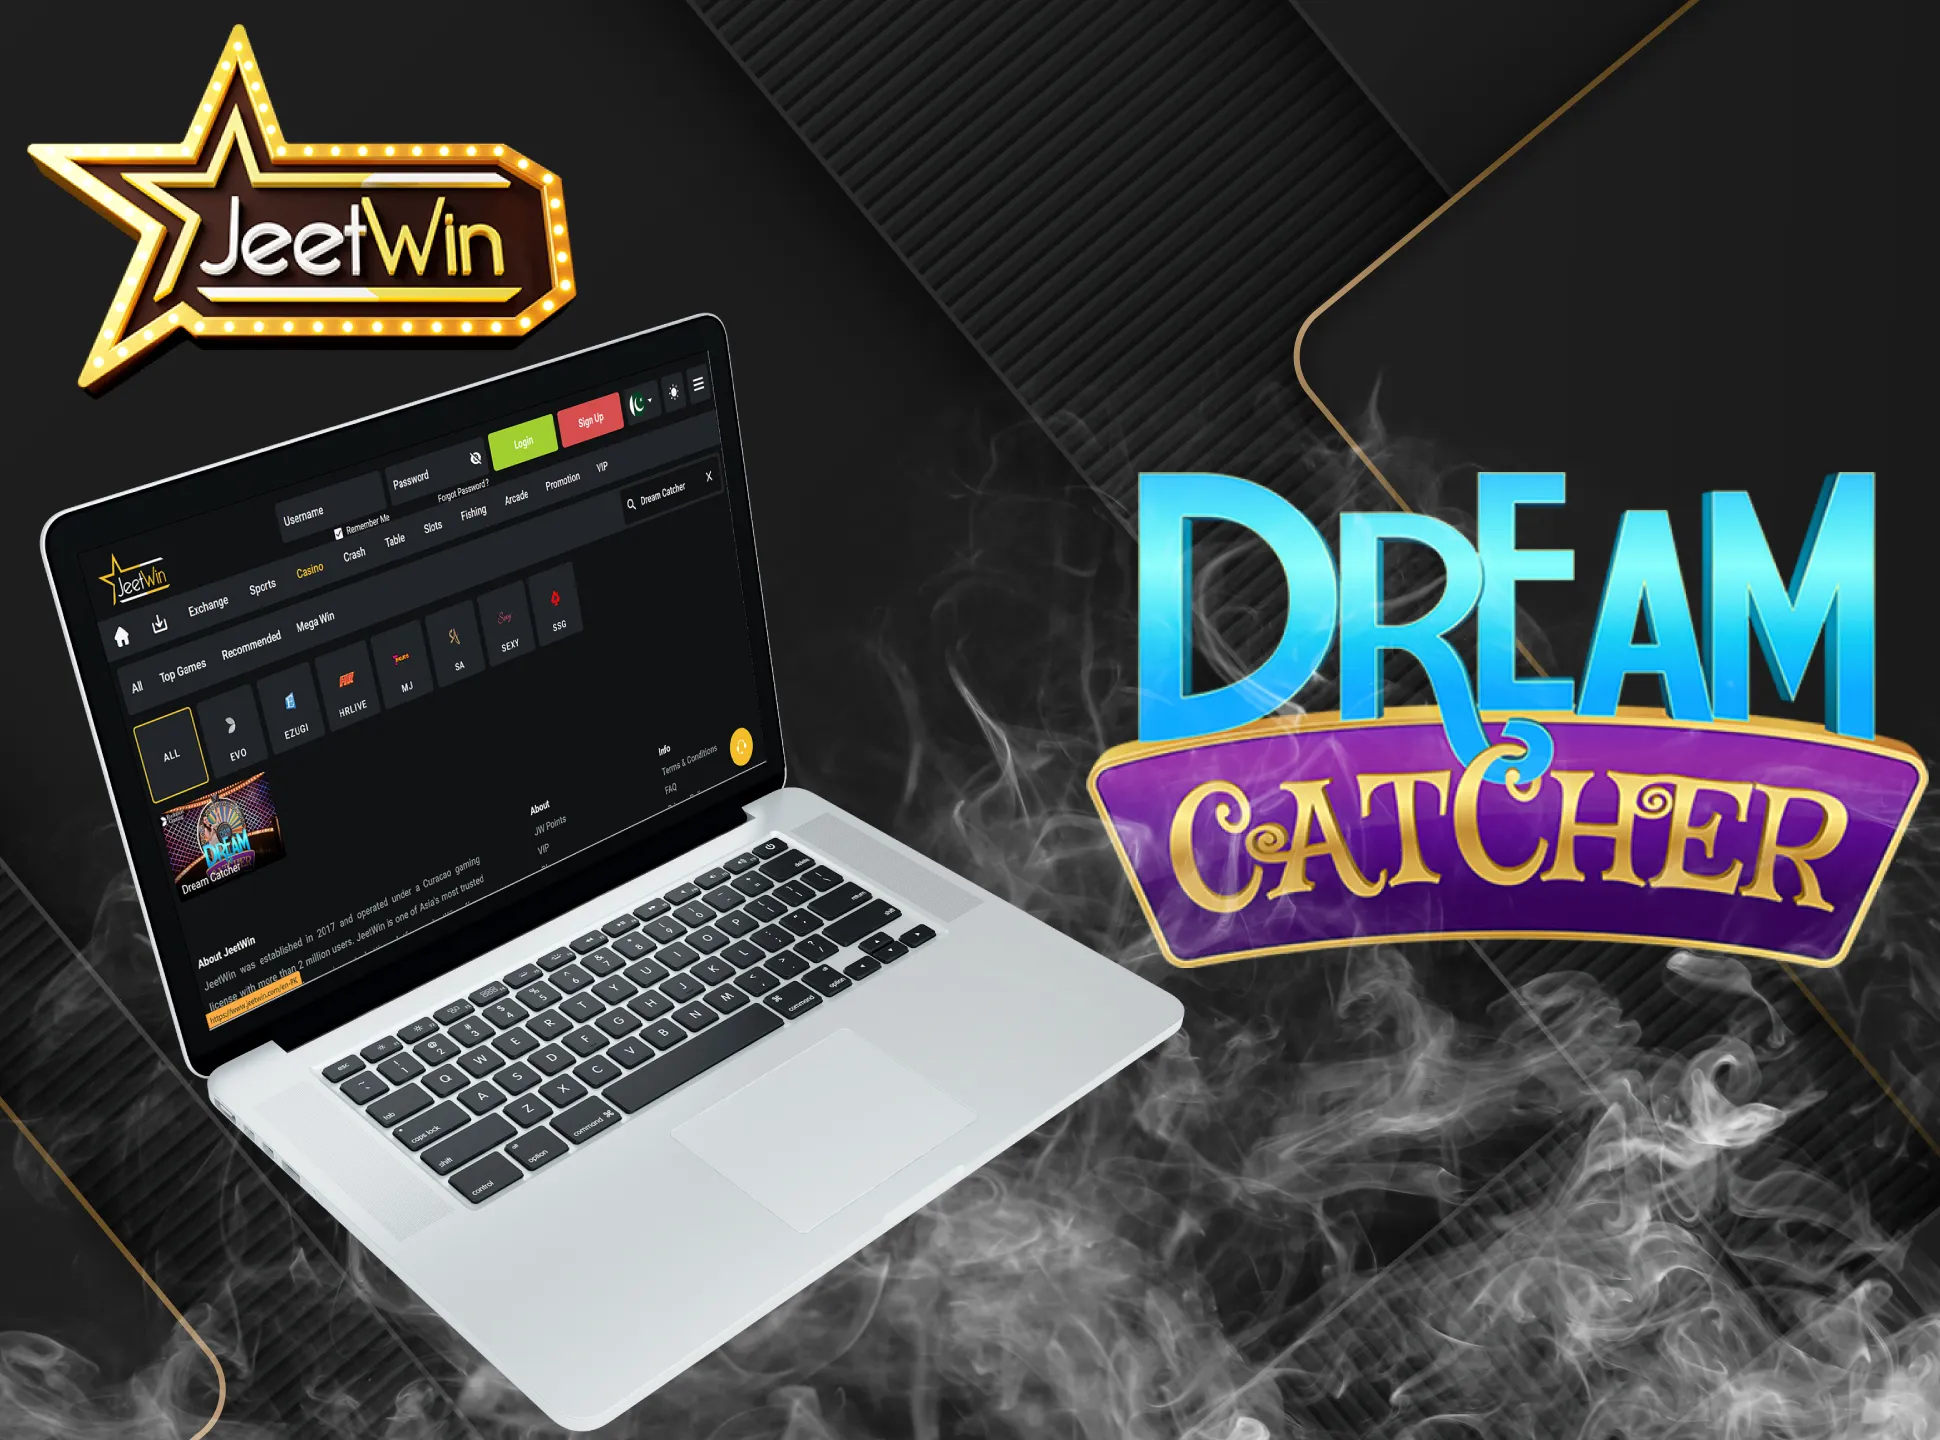 Read Dream Catcher terms and conditions and play on JeetWin.